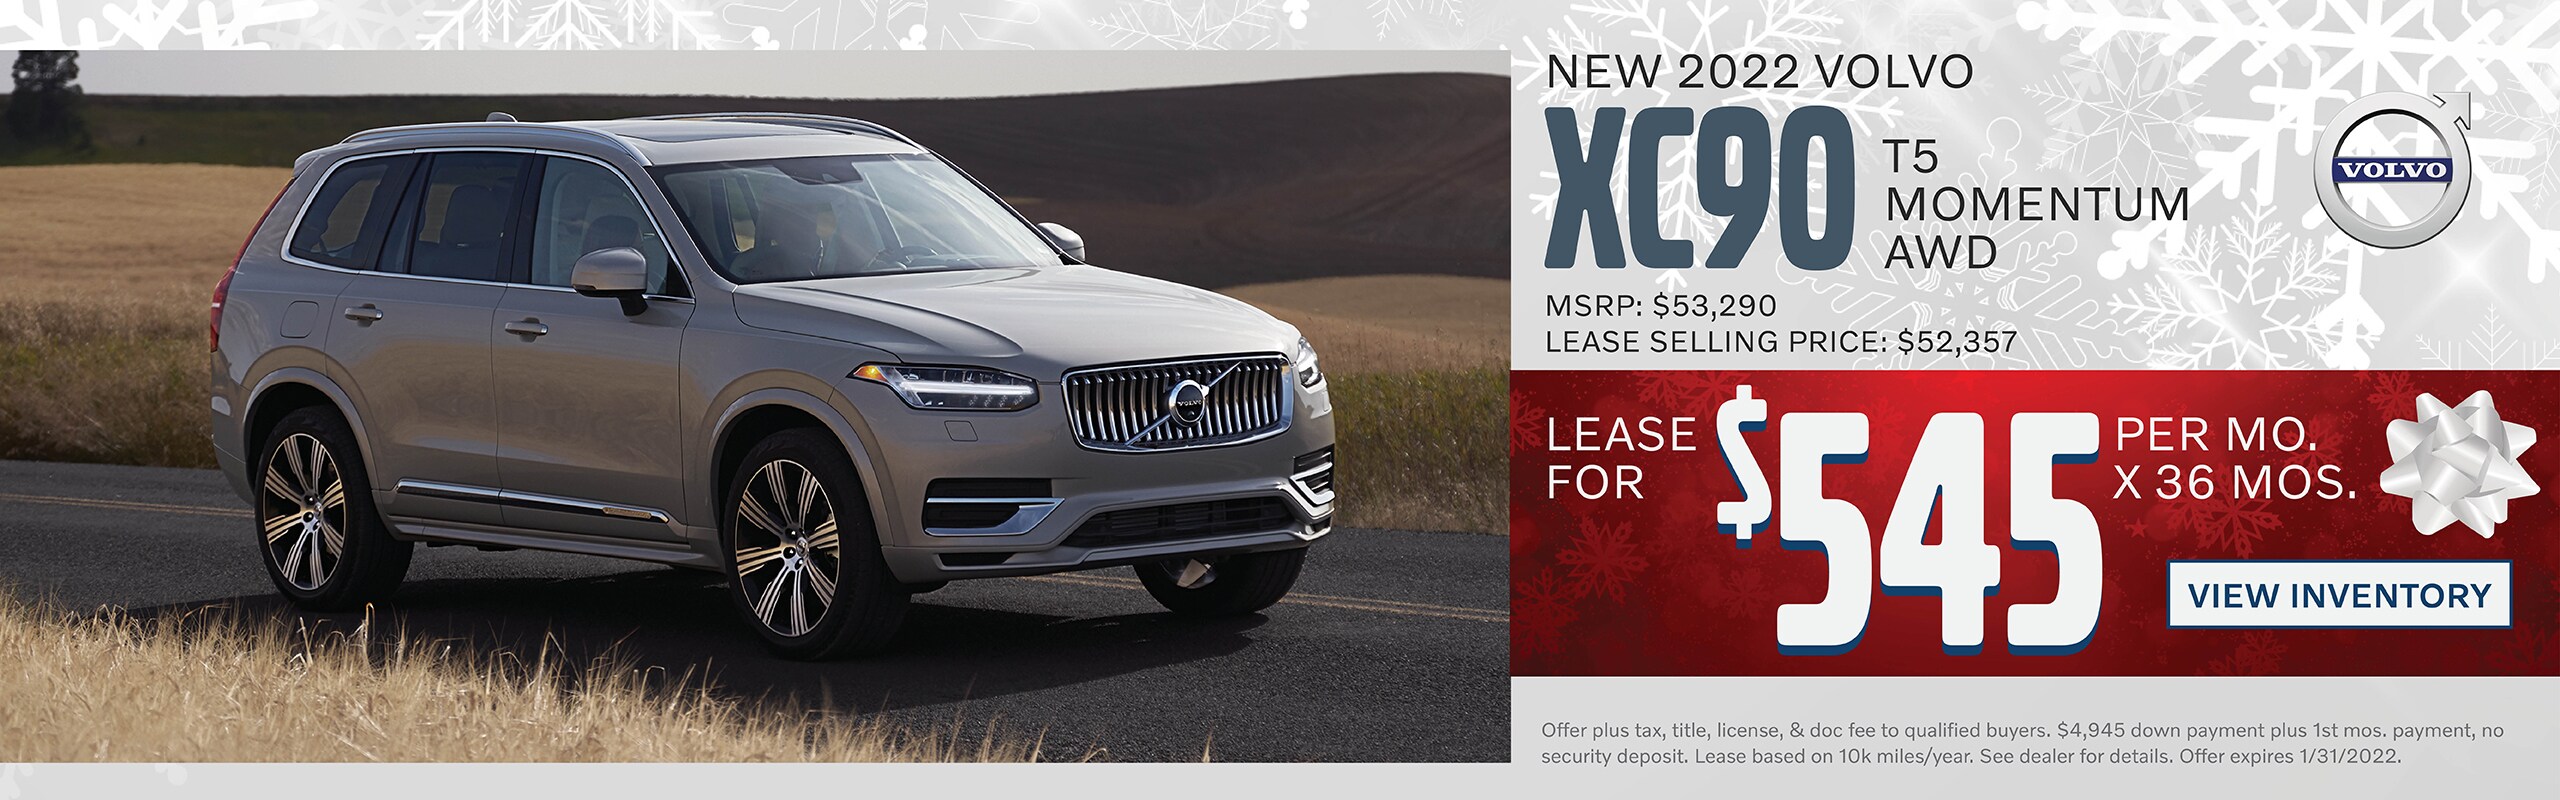 Lease a new 2022 Volvo XC90 T5 Momentum AWD for $545 per month for 36 months - MSRP $53,290 - Lease $52,357